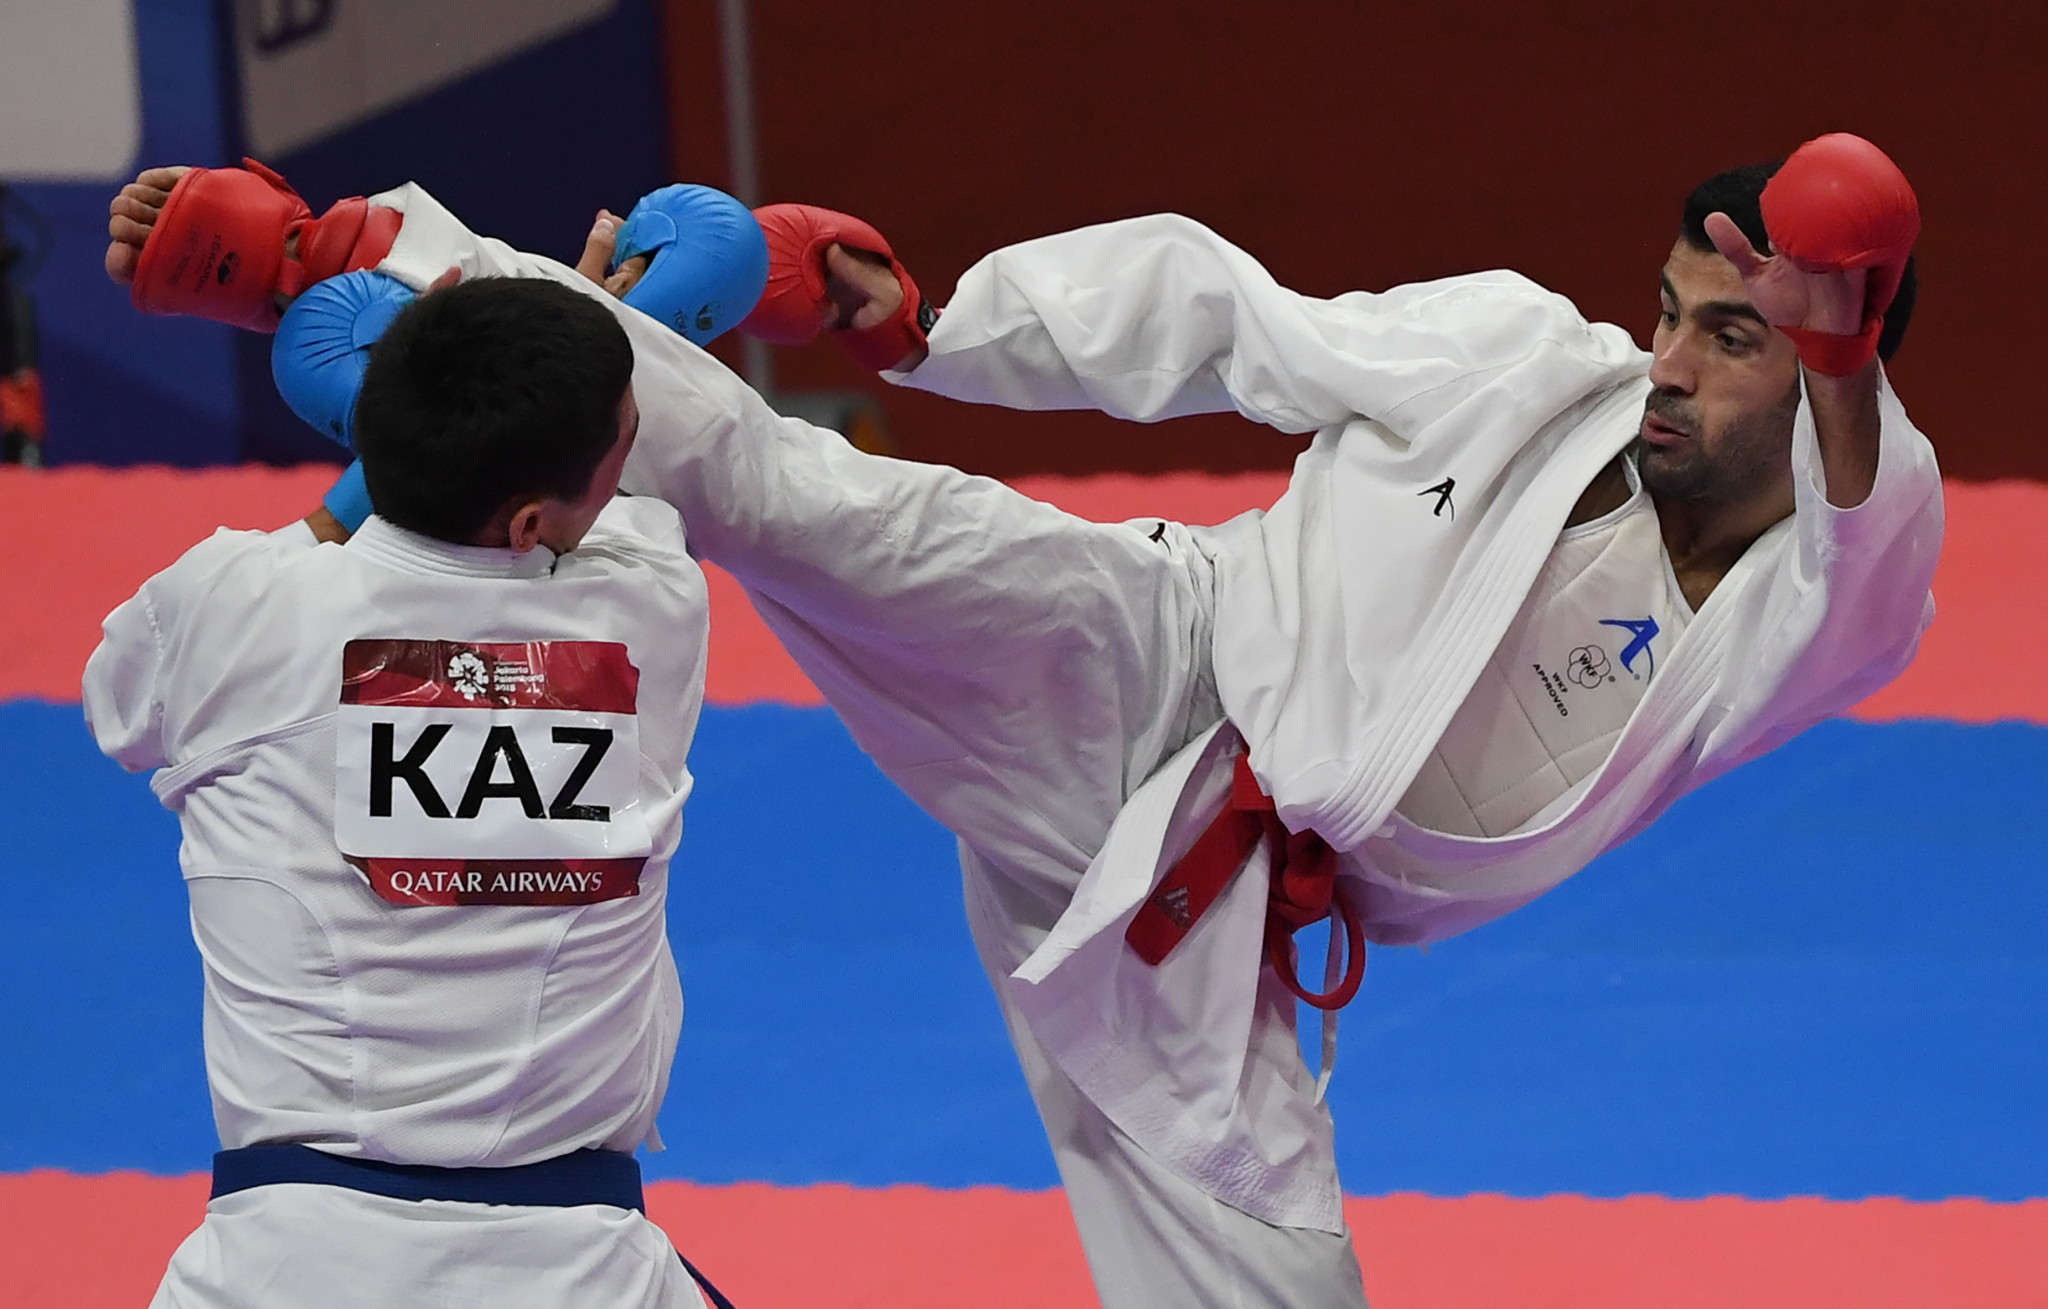 Ali Abdulaziz then doubled Kuwait's gold medal tally with victory in the men's under-67 kilograms karate event, beating Kazakhstan's Didar Amirali 4-0 in the final ©Getty Images